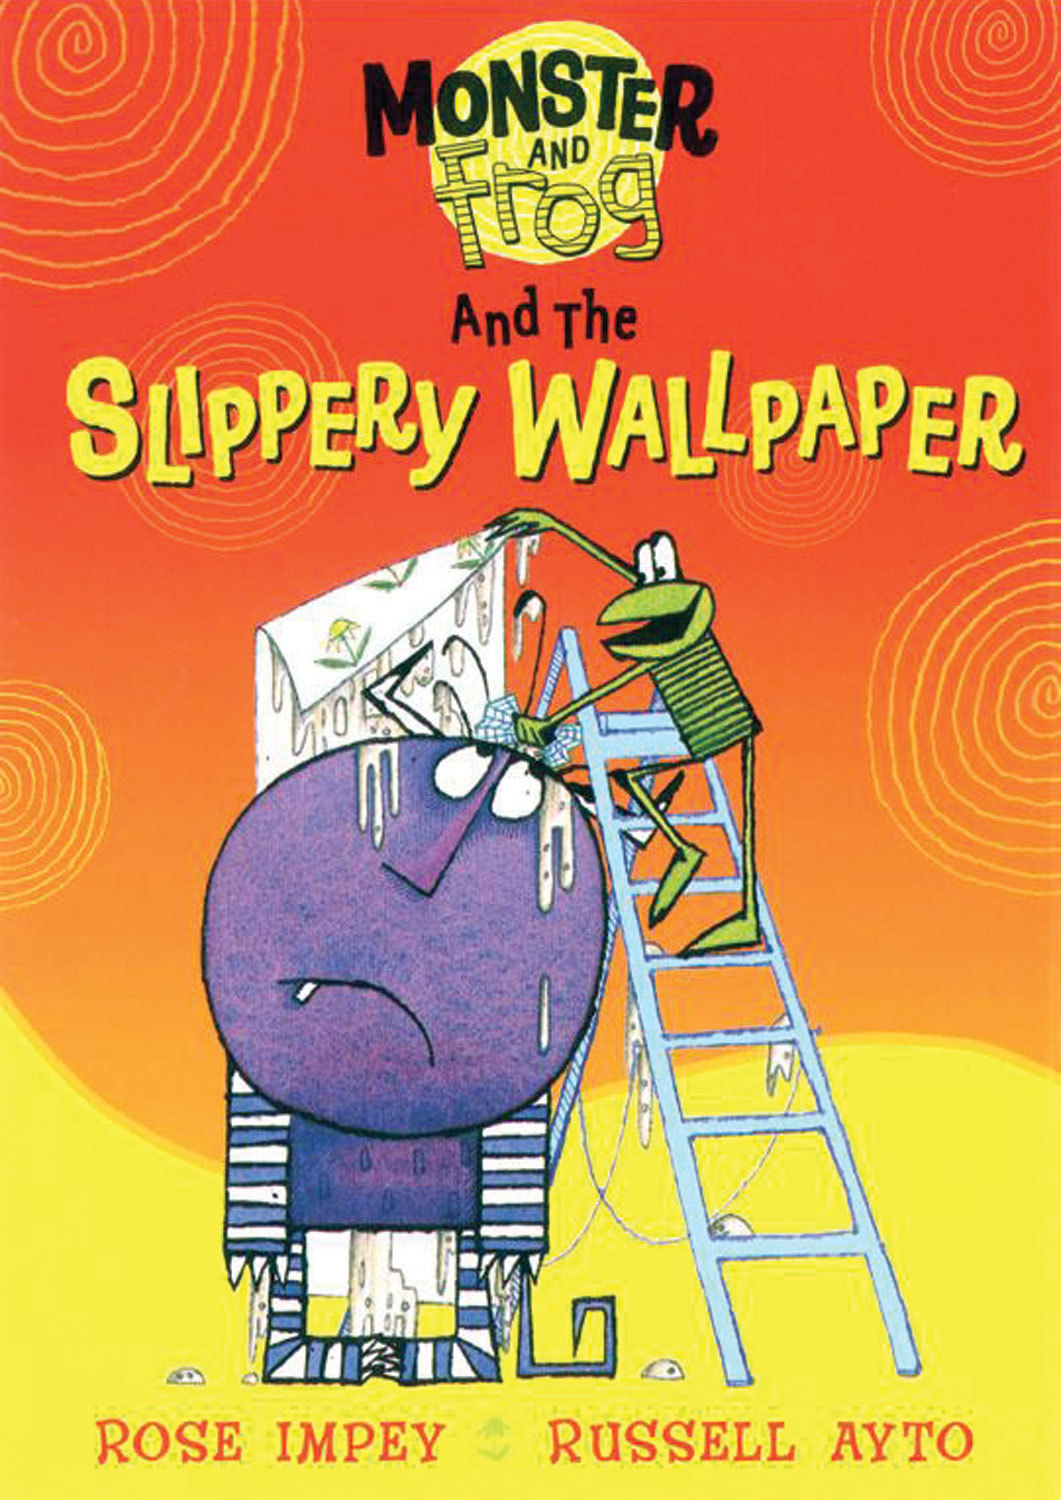 Monster and Frog and the Slippery Wallpaper